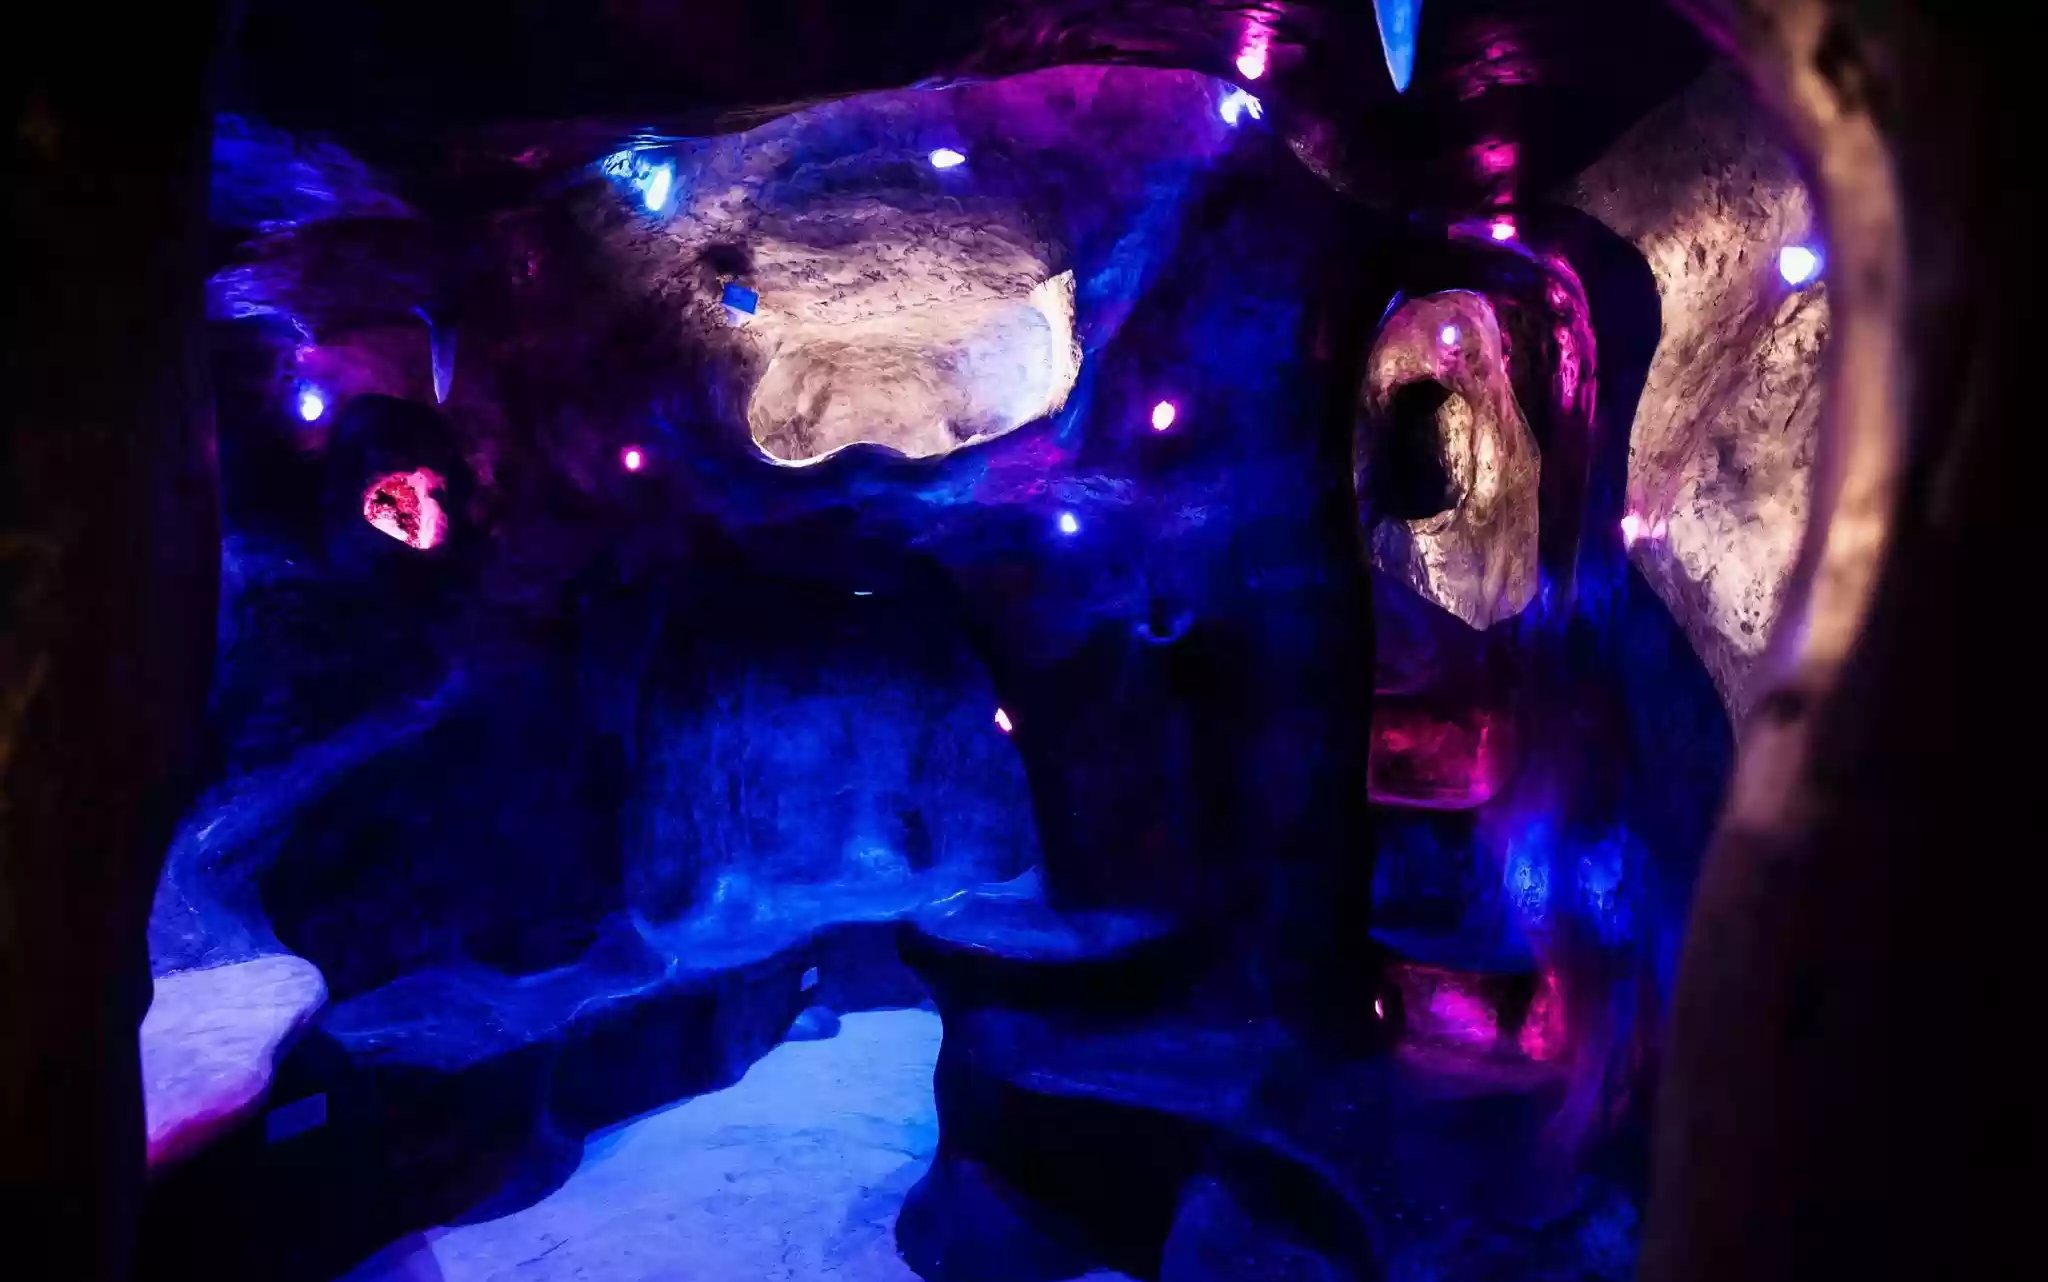 cave meditation room with lights